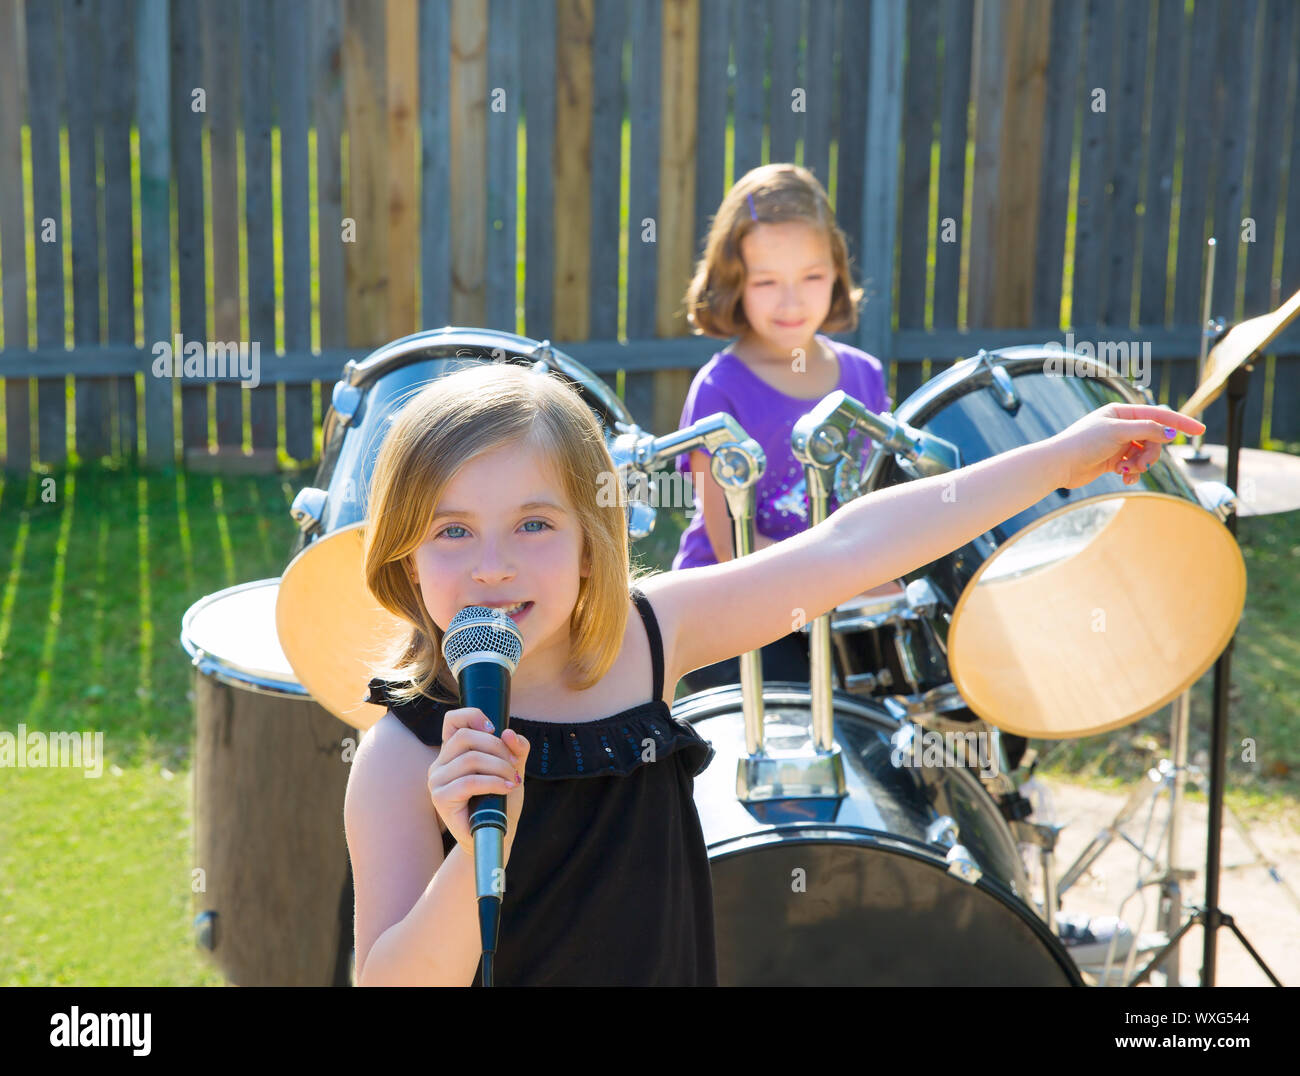 Blond kid singer girl singing playing live band in backyard concert with friends Stock Photo